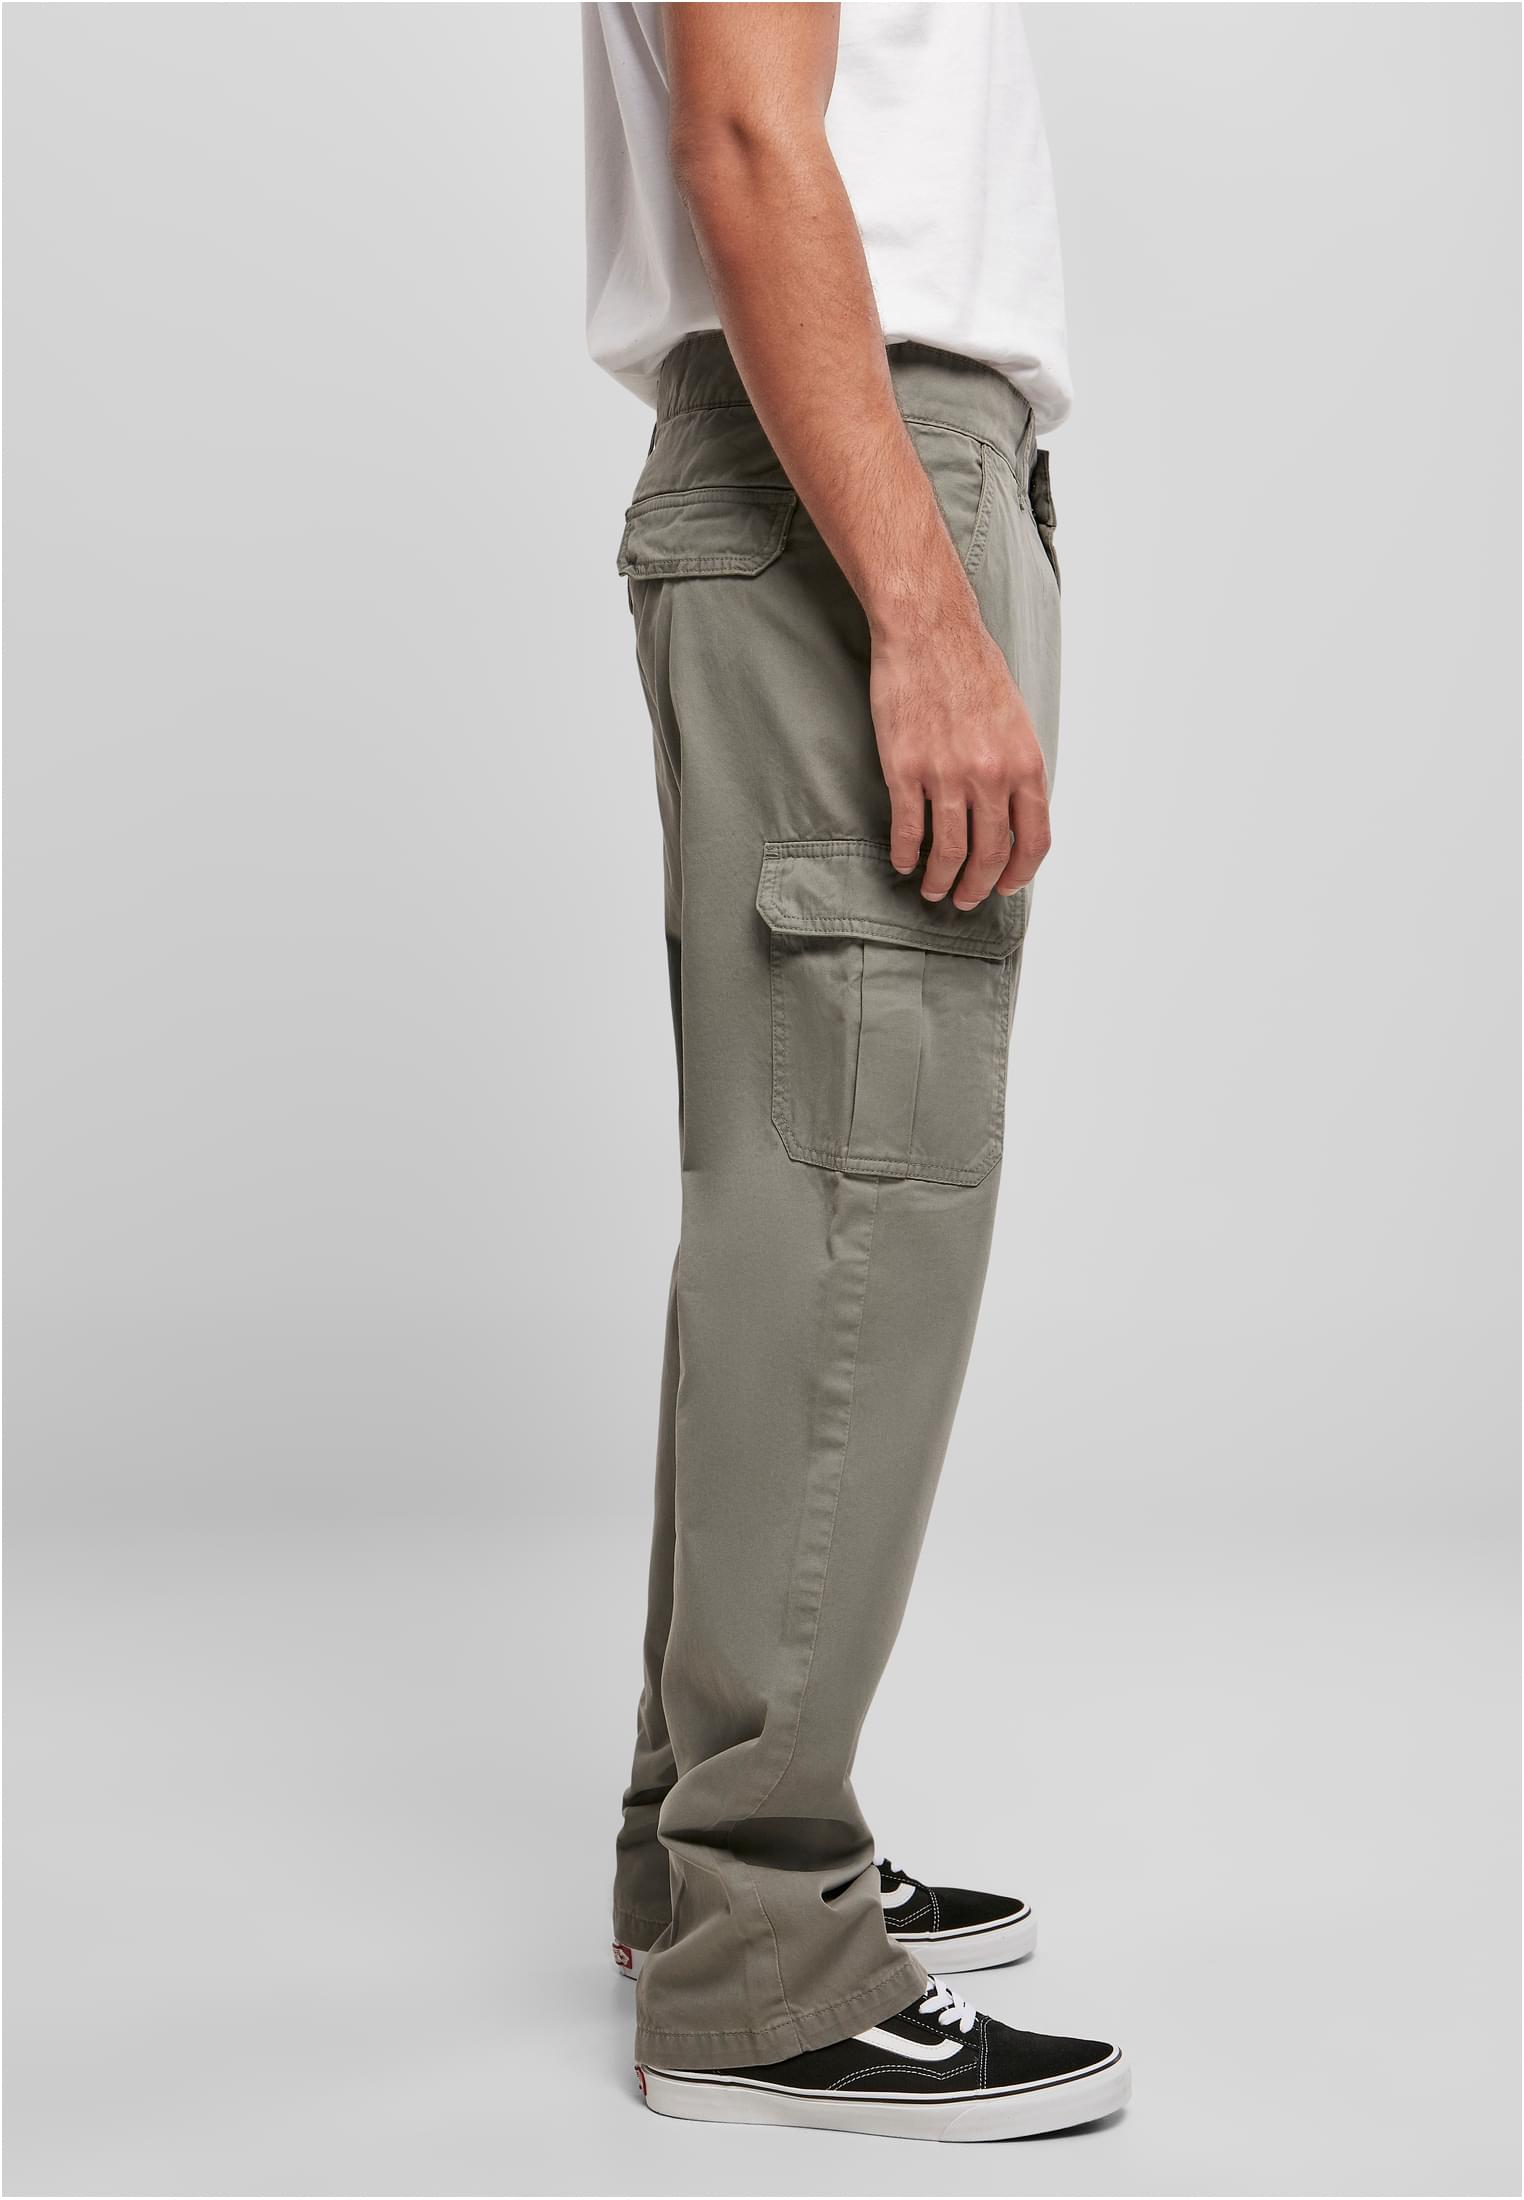 AMILIEe High Waist Cargo Pants for Women Straight Leg Cargo Trousers with  Pockets  Walmartcom